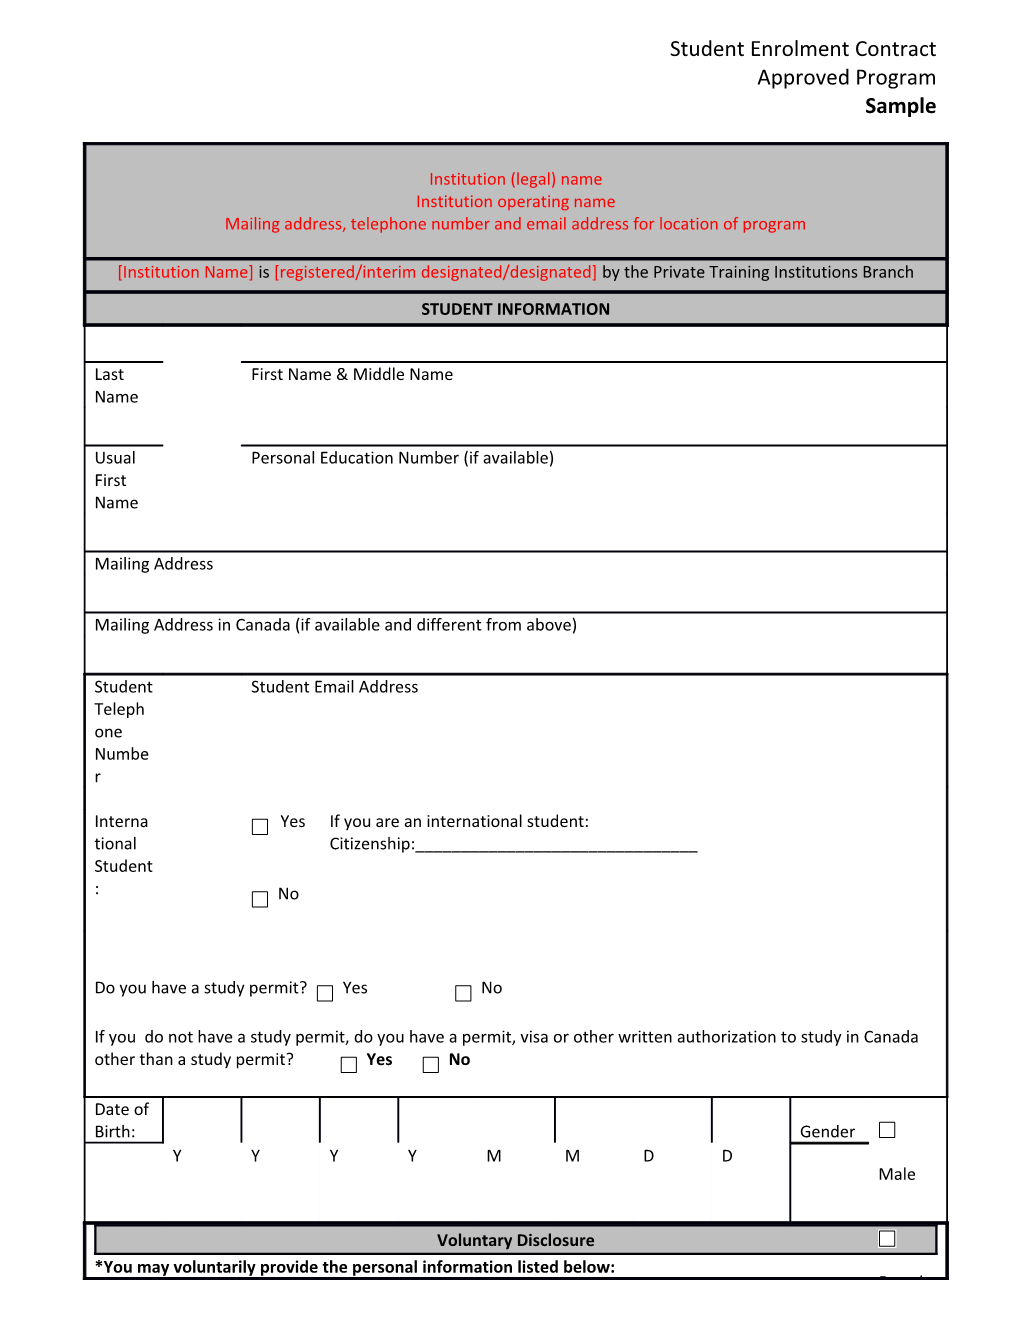 Student Enrolment Contract - Approved Program - Sample